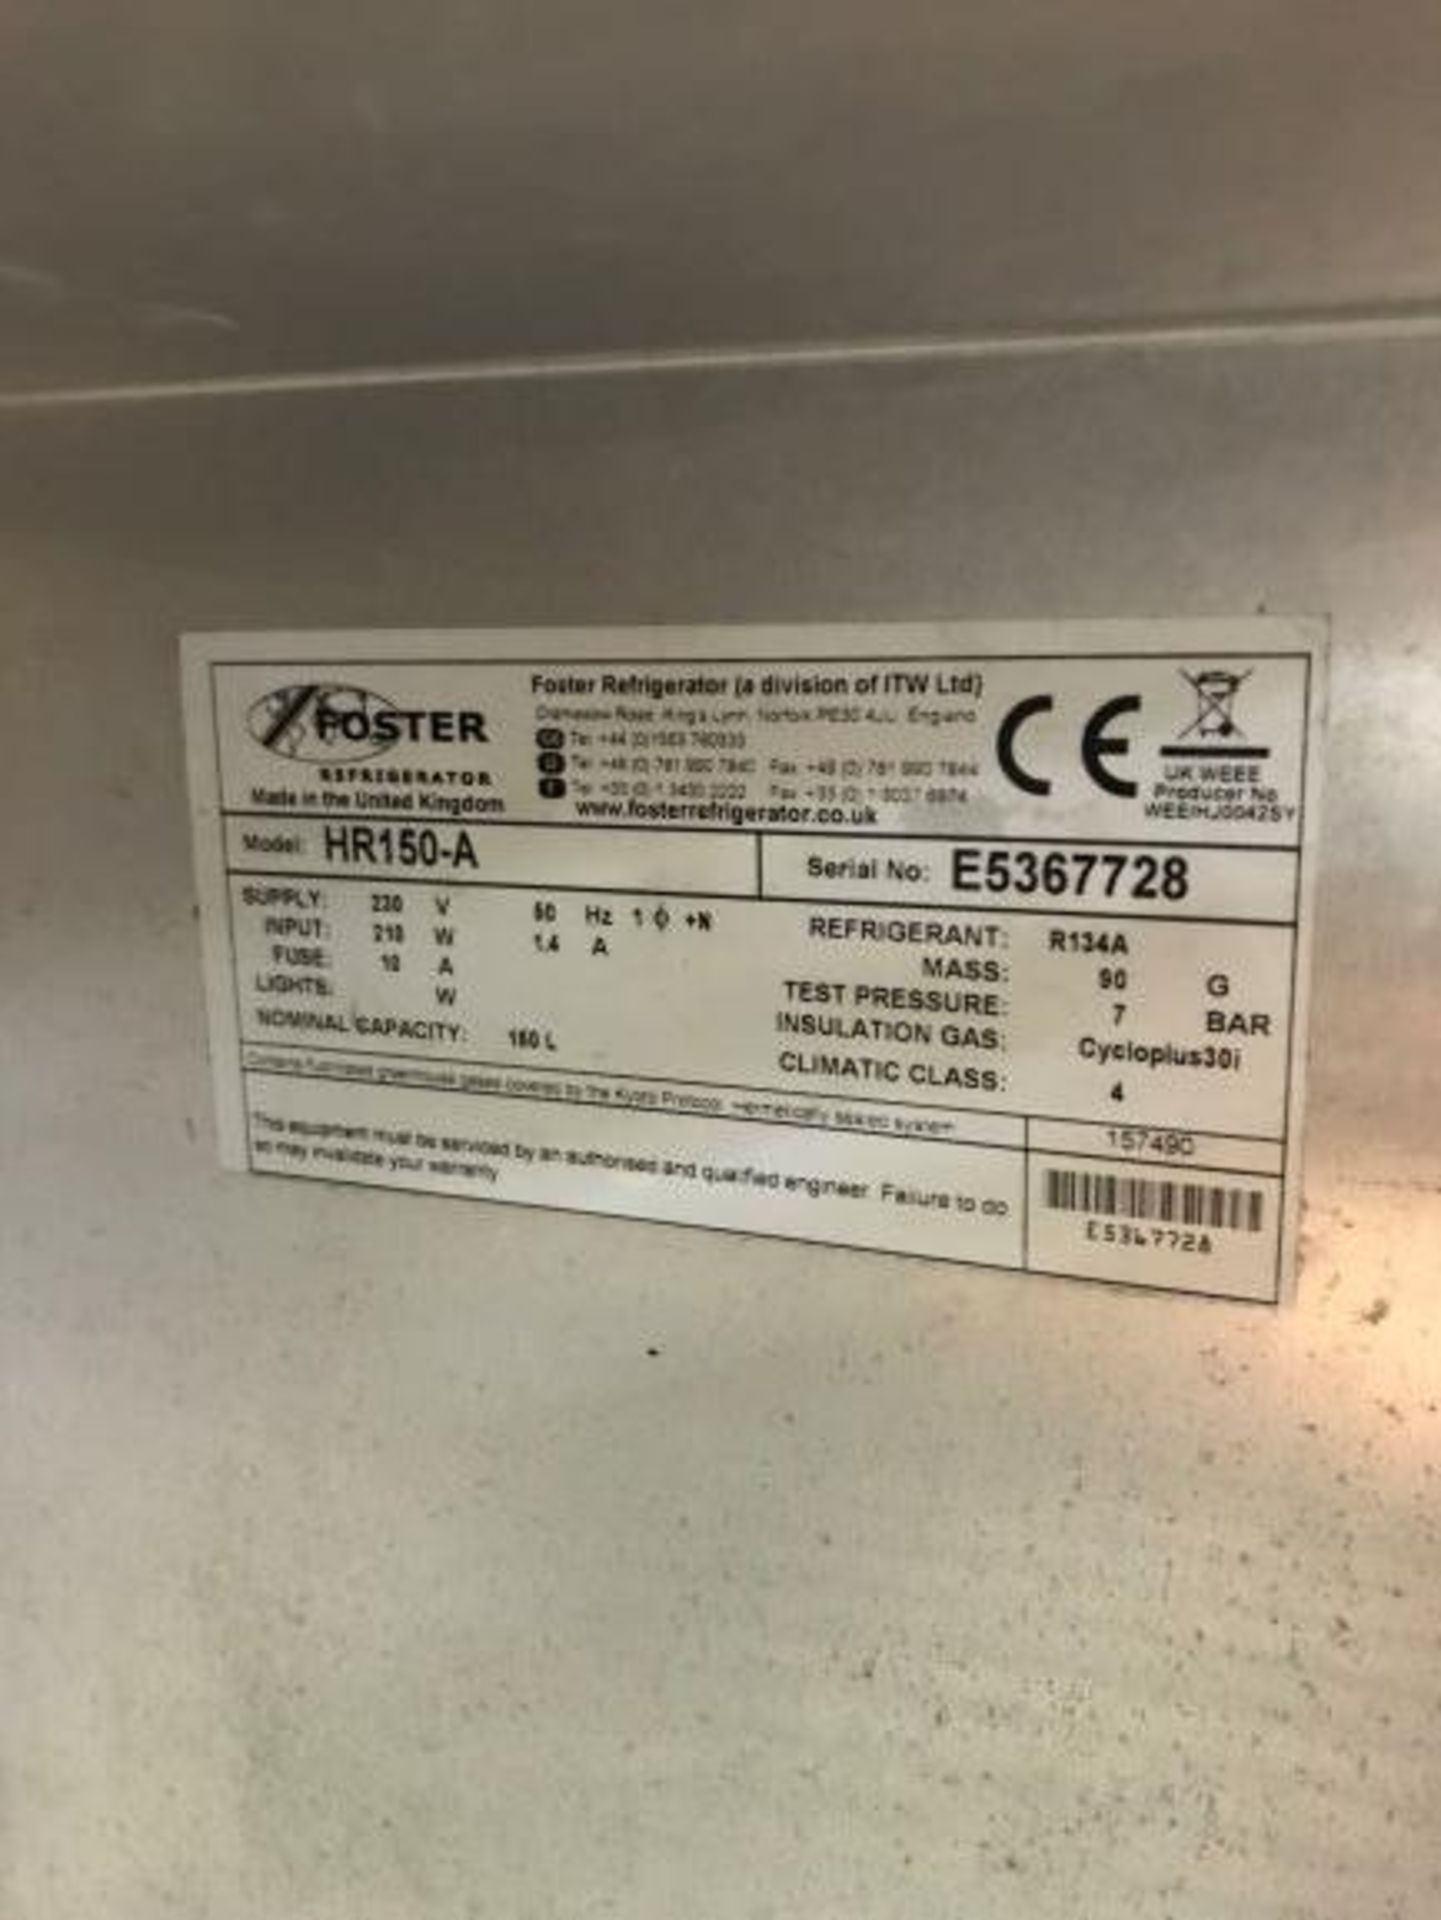 Foster Refrigeration HR150-A stainless steel single door under counter refrigerator - Image 3 of 3